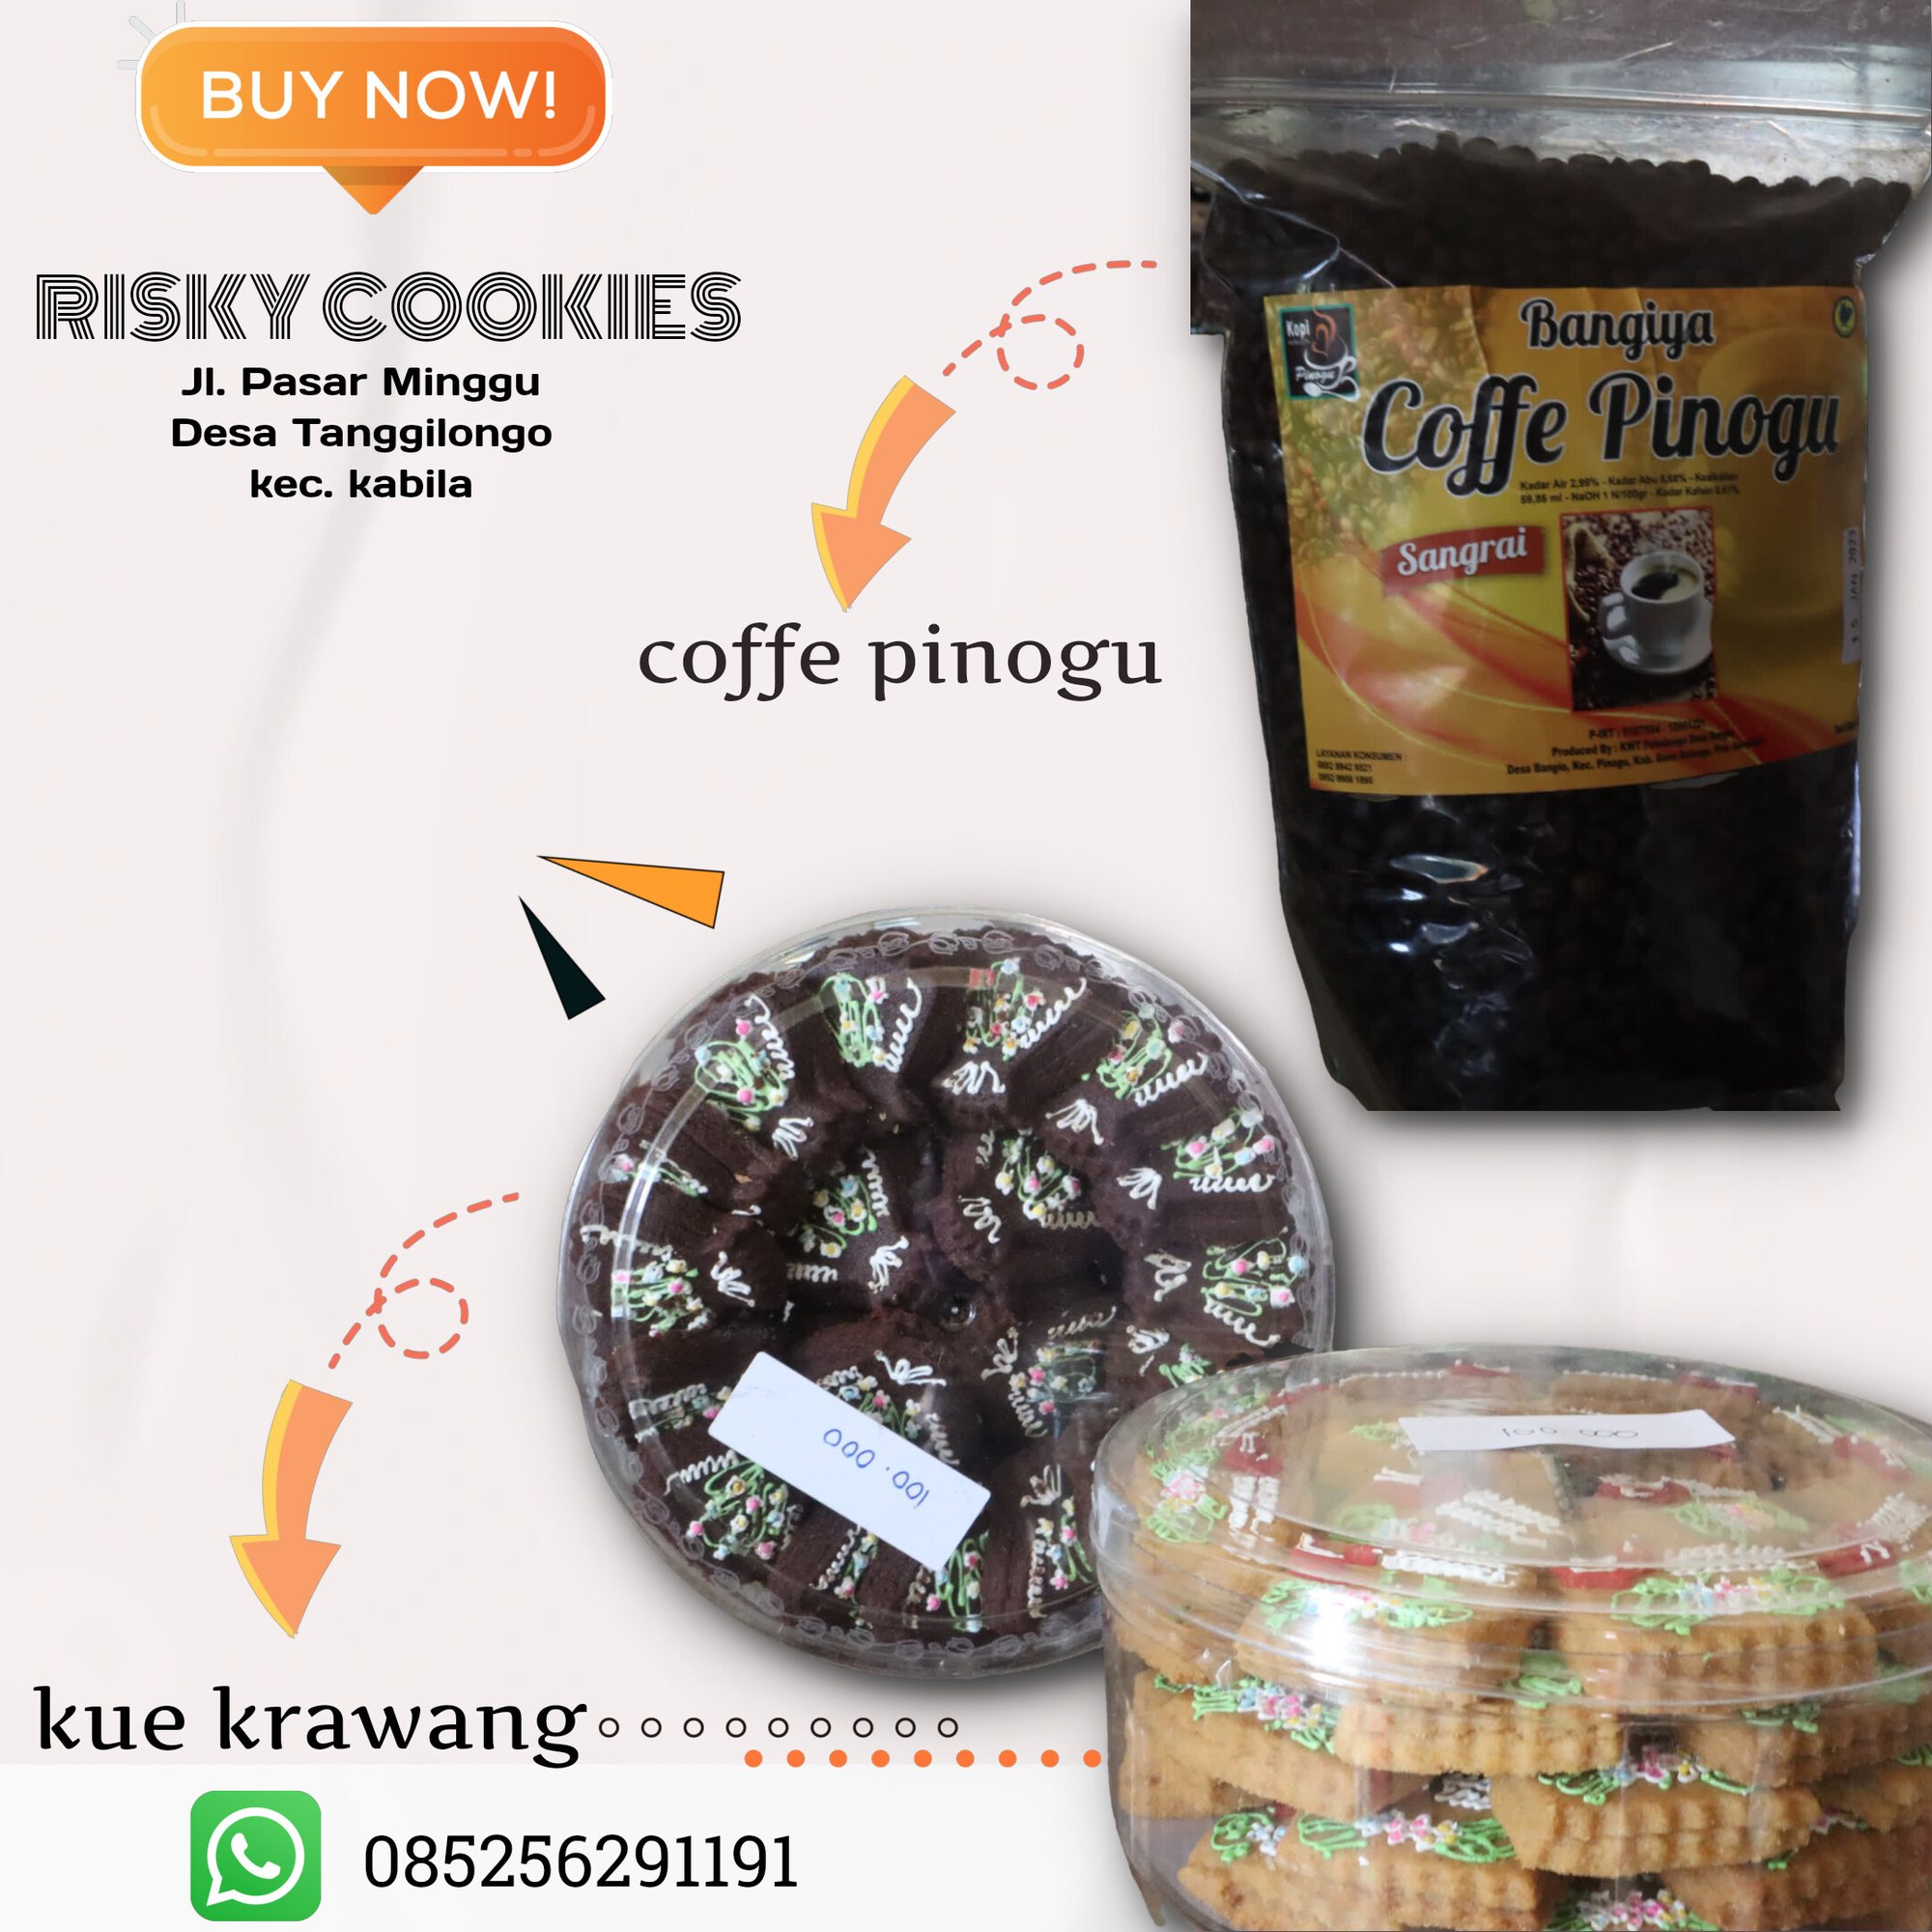 27. Additional-geoproduk Rizky Cookies